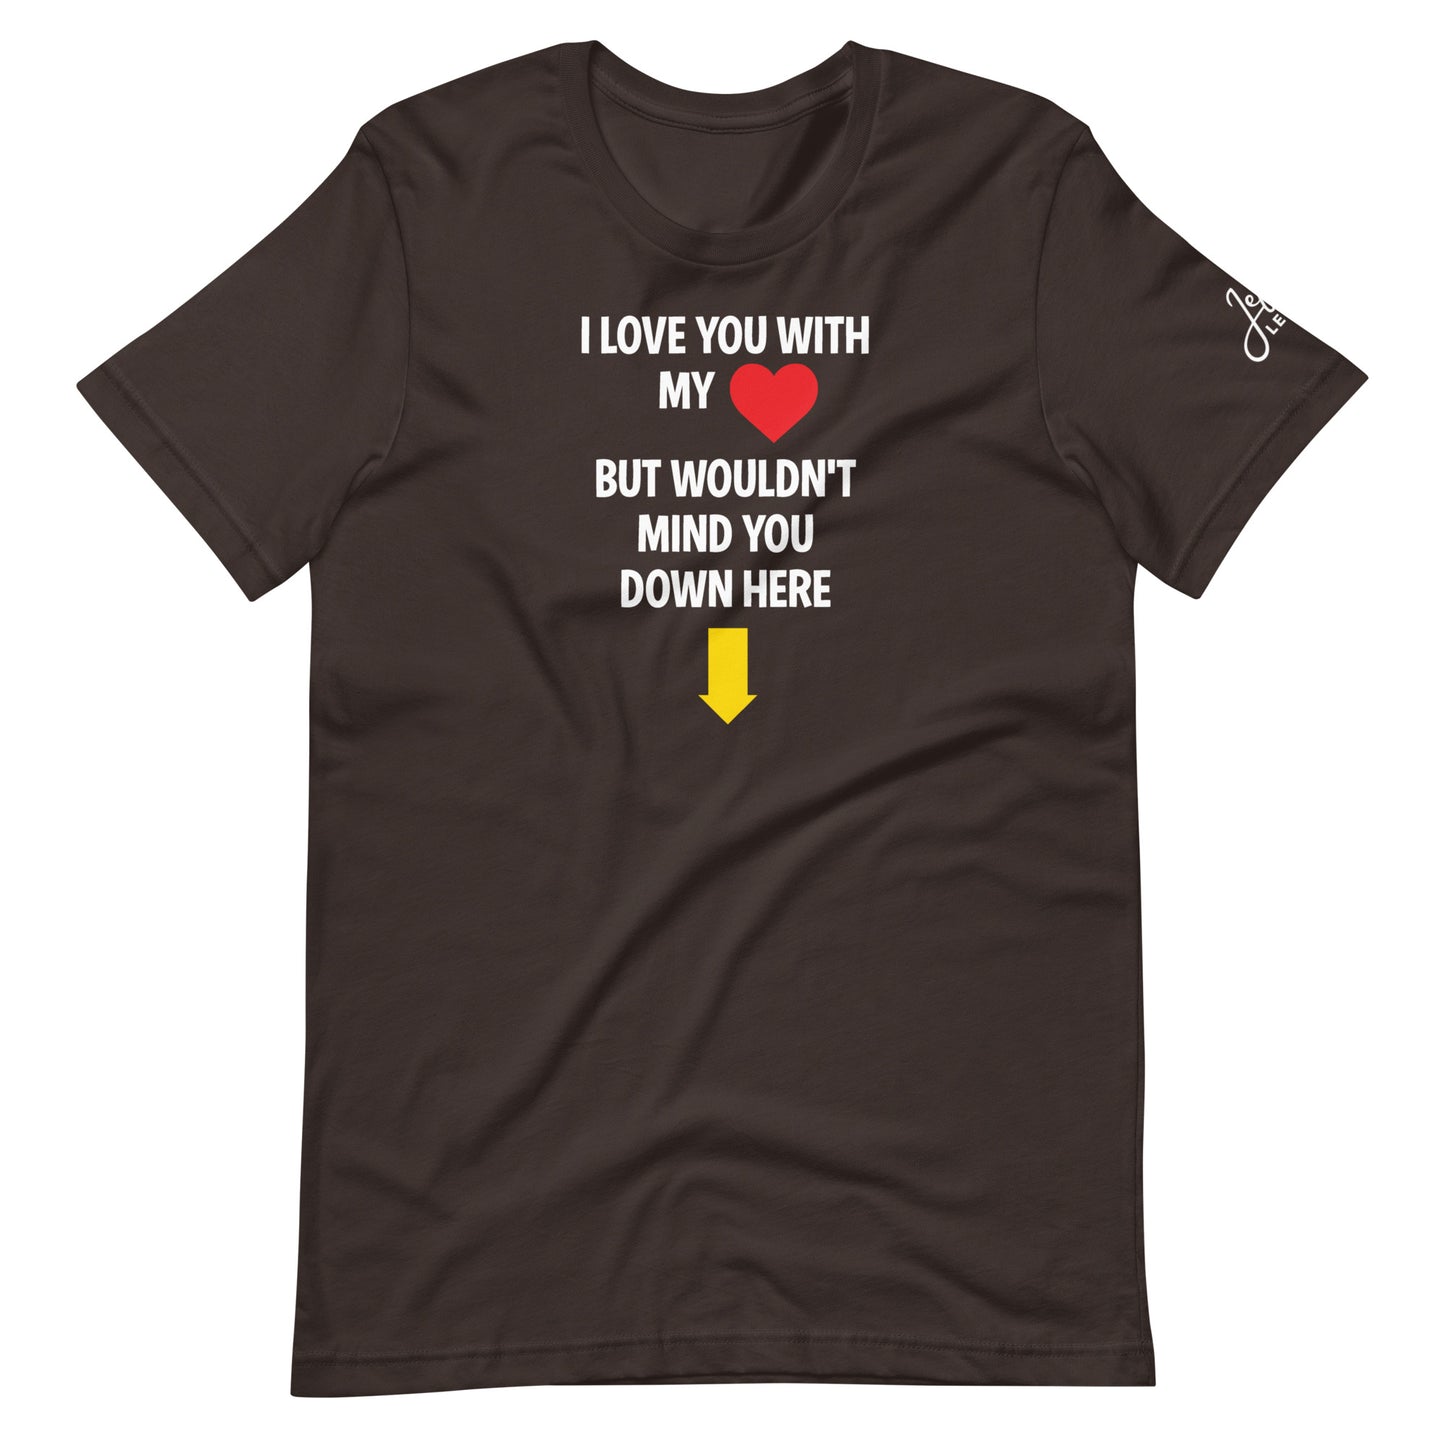 I Love You With My Heart T-Shirt